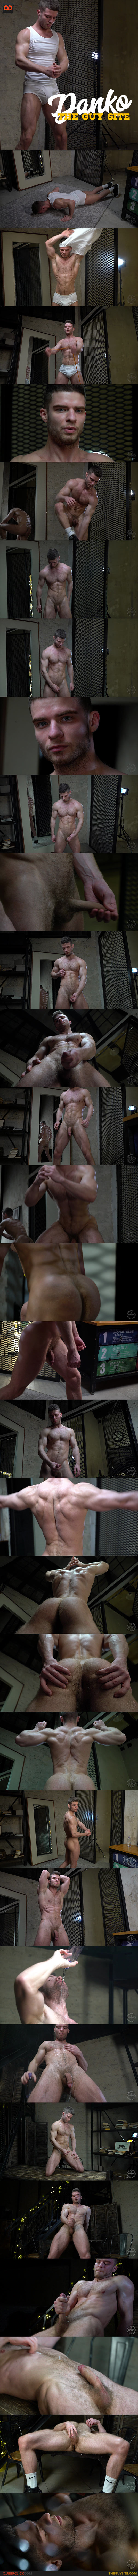 The Guy Site: Danko - Hairy and Uncut